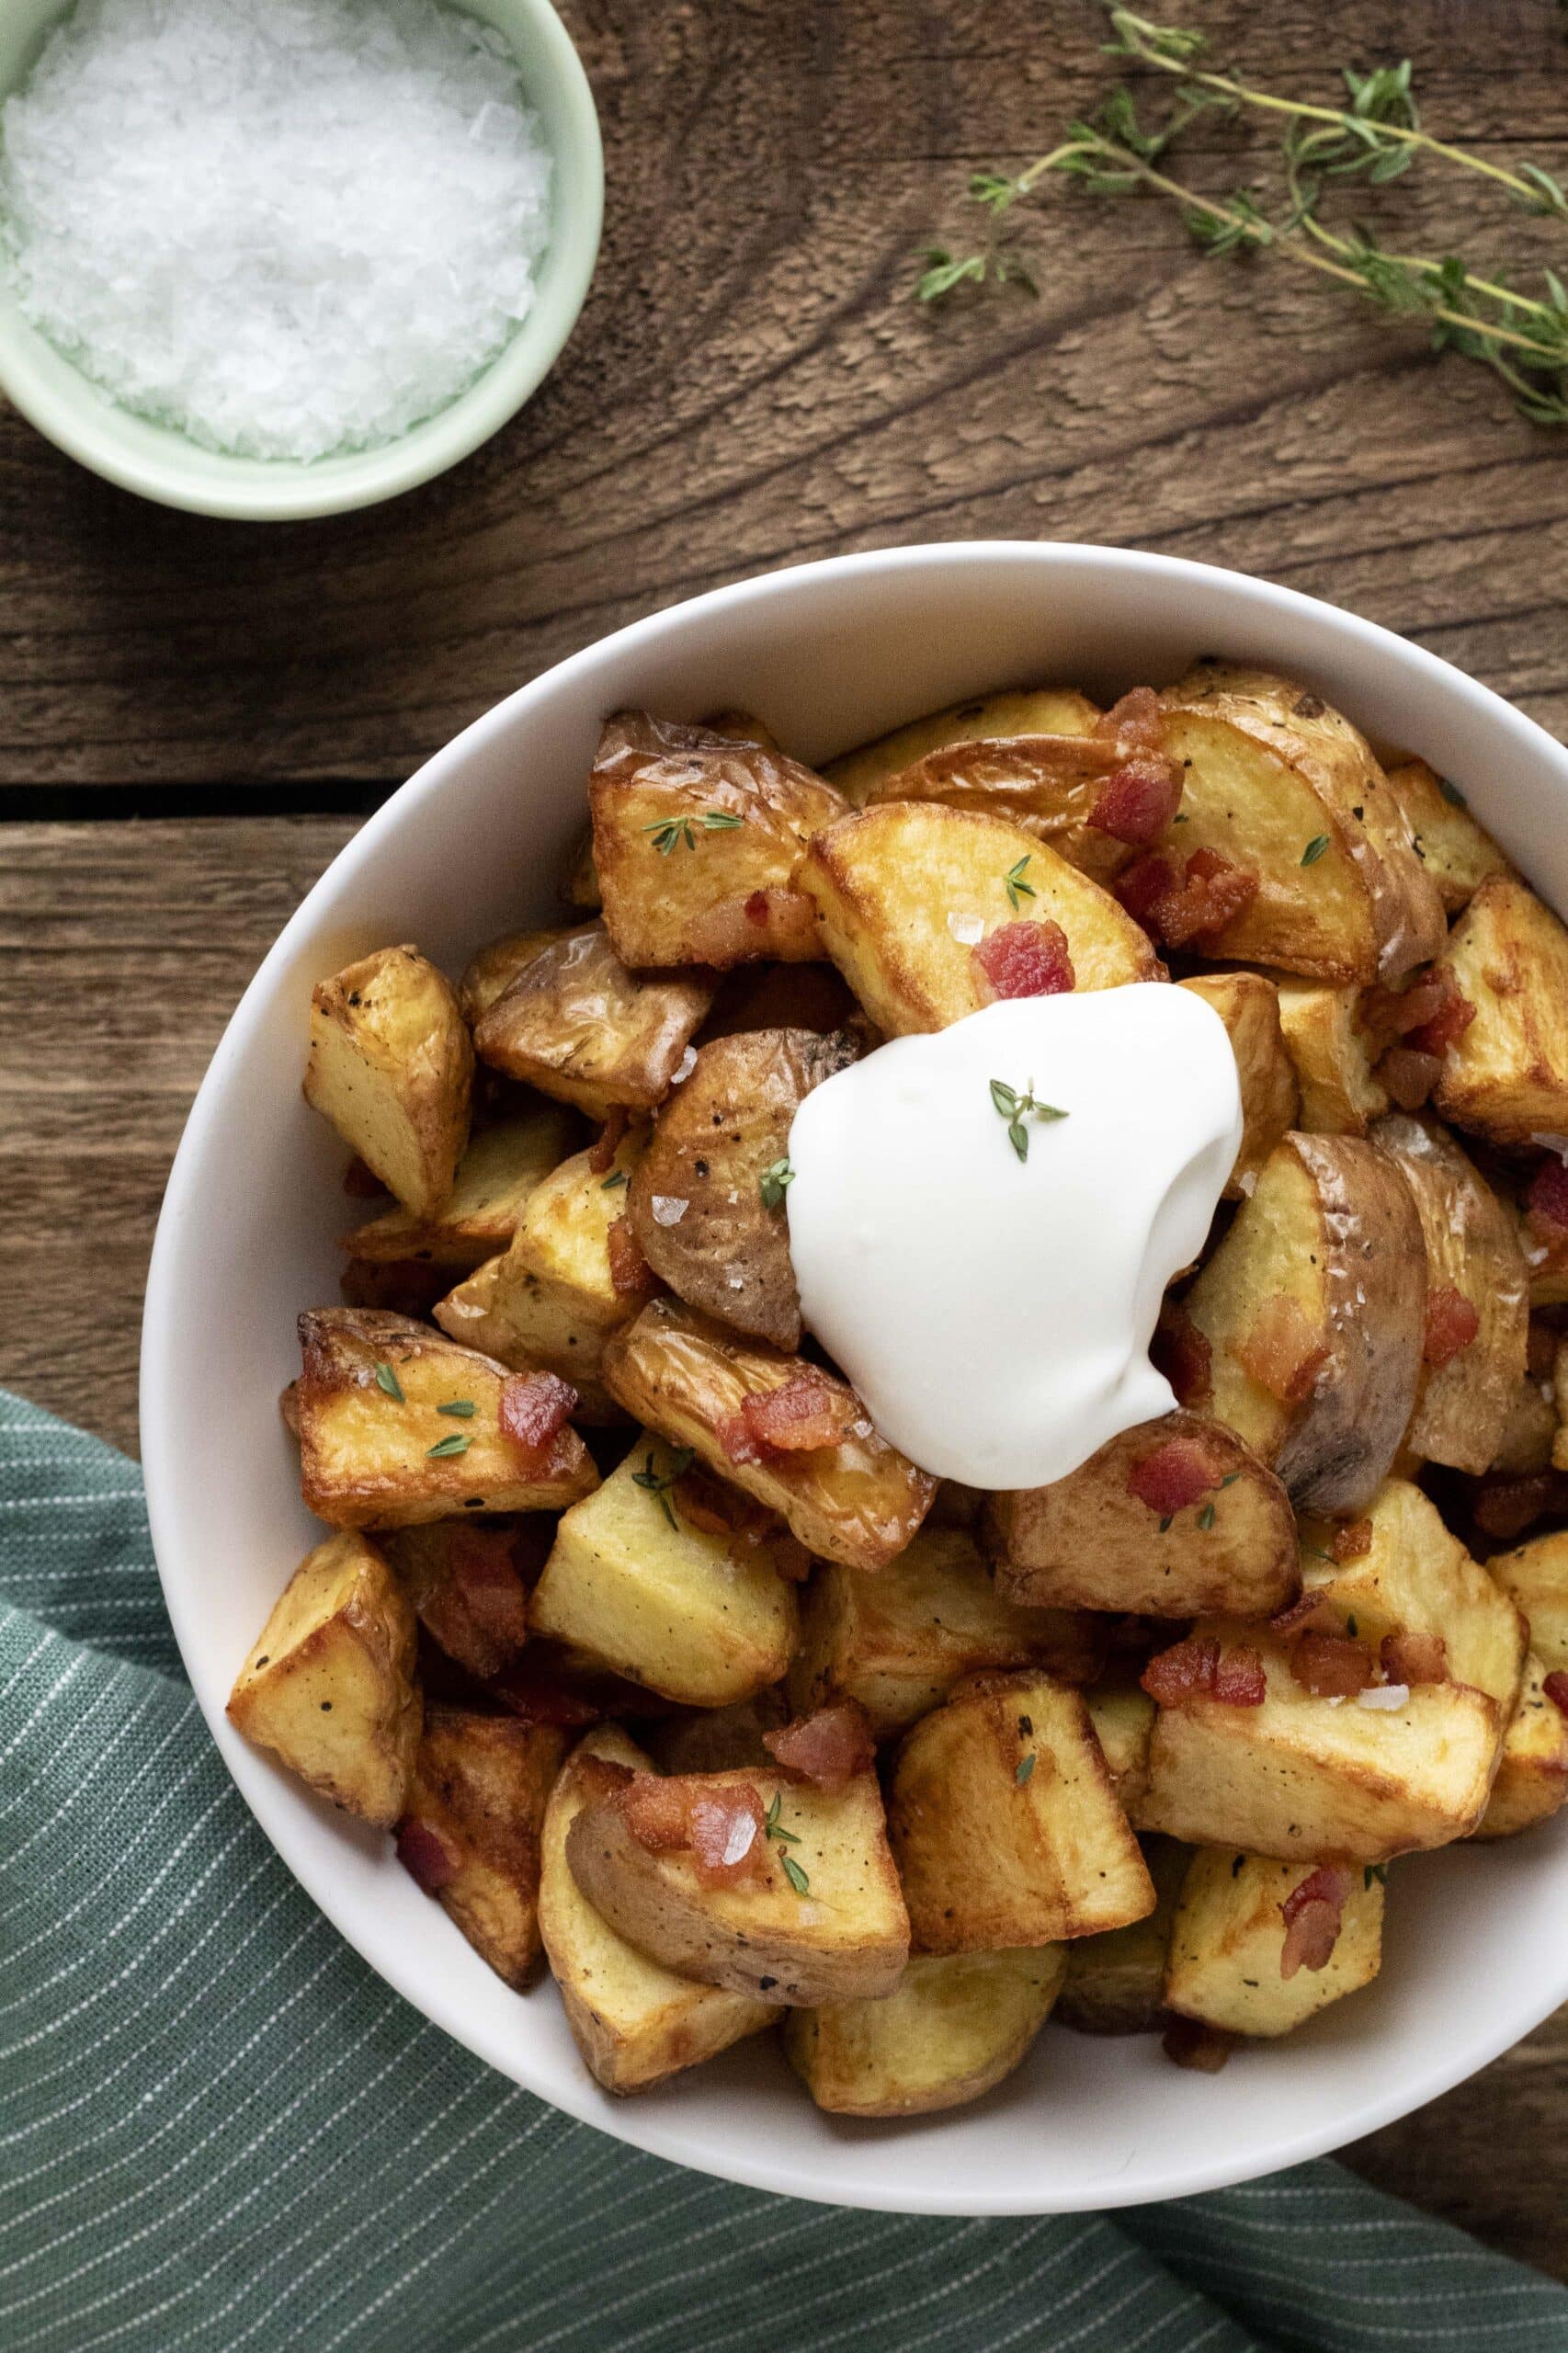 Air fryer crispy roasted potatoes with bacon, salt, herbs, and sour cream in a white bowl on a wooden background.